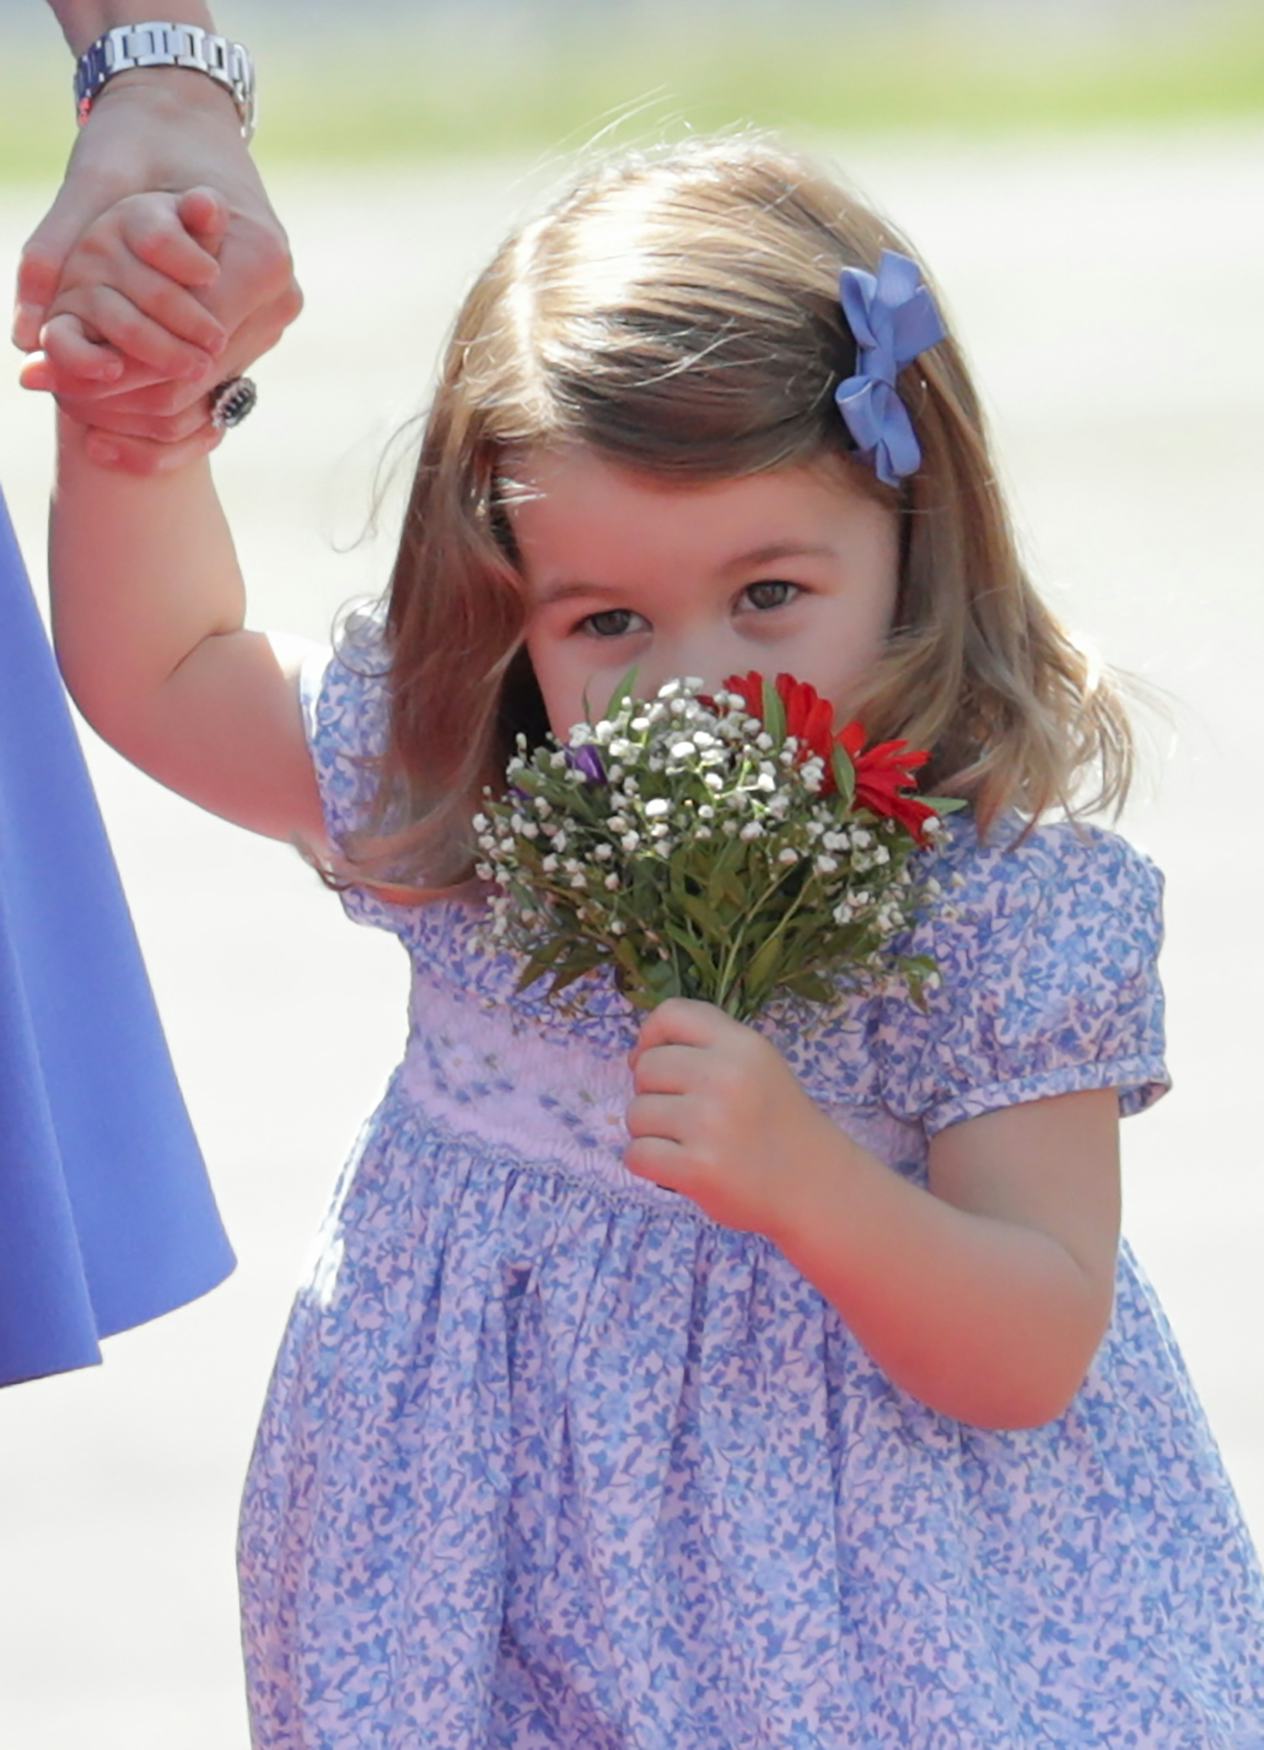 24 Photos Of Princess Charlotte Making Silly & Cute Faces